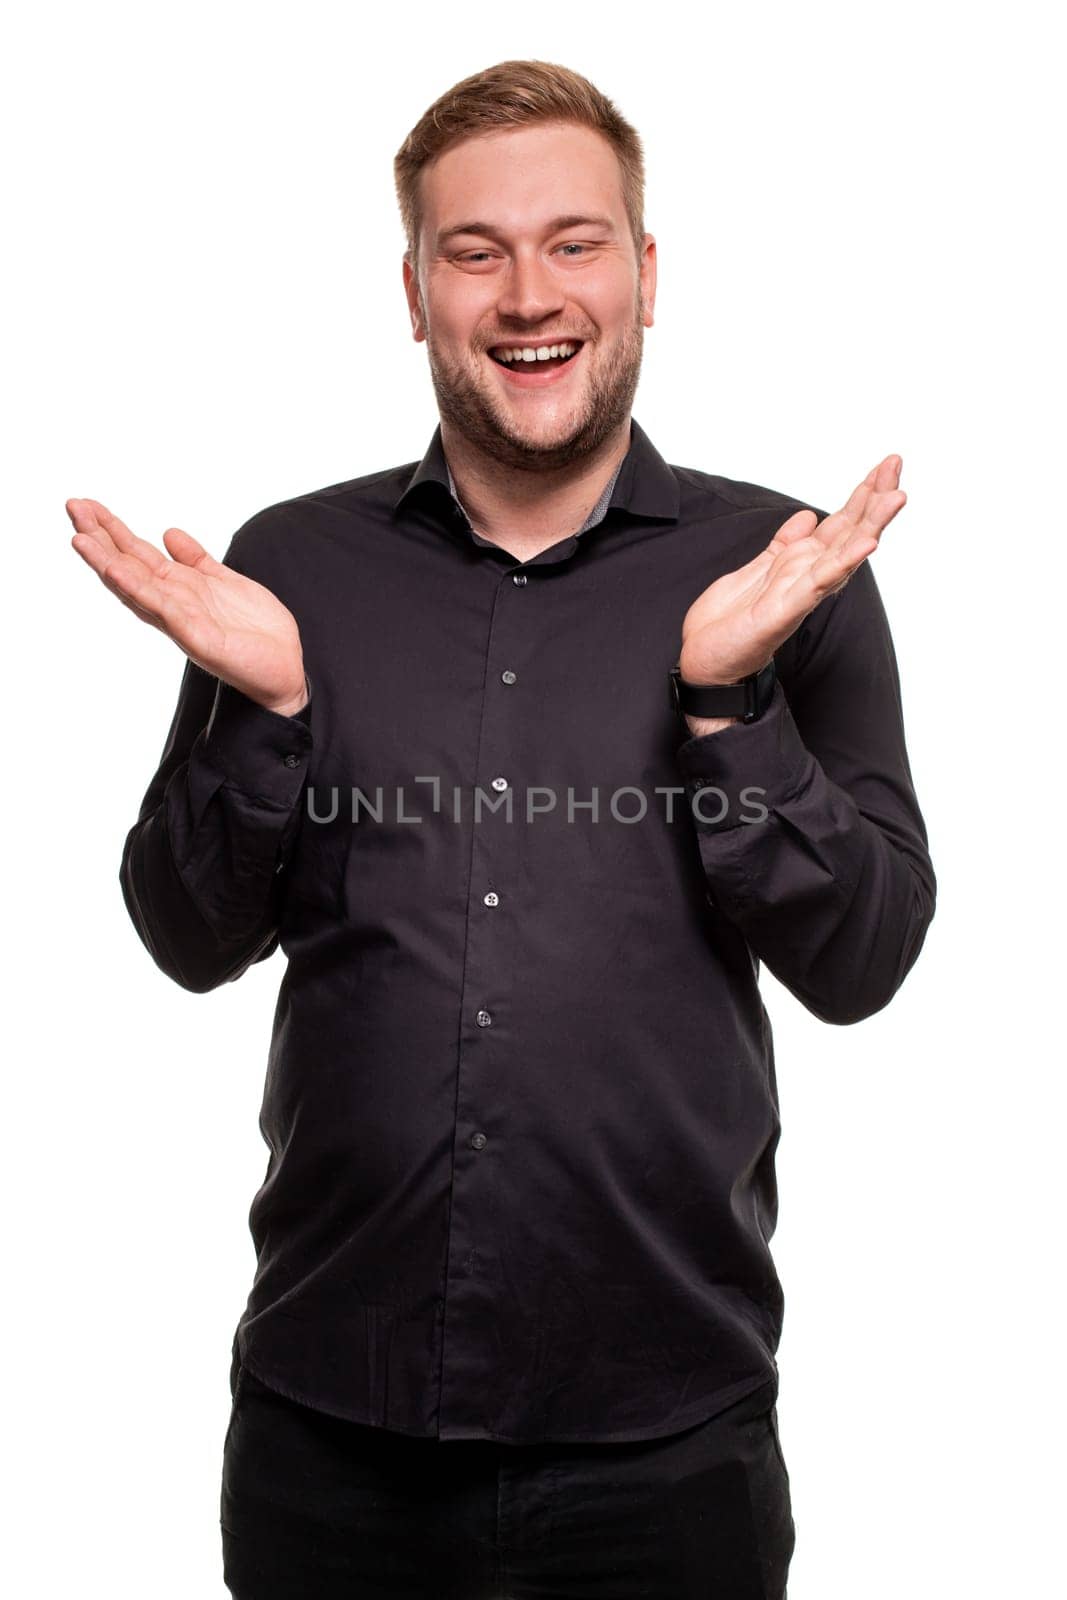 Bearded man smiling and spreading hands don't know what to say in answer. Body language. Emotional portrait on a white background